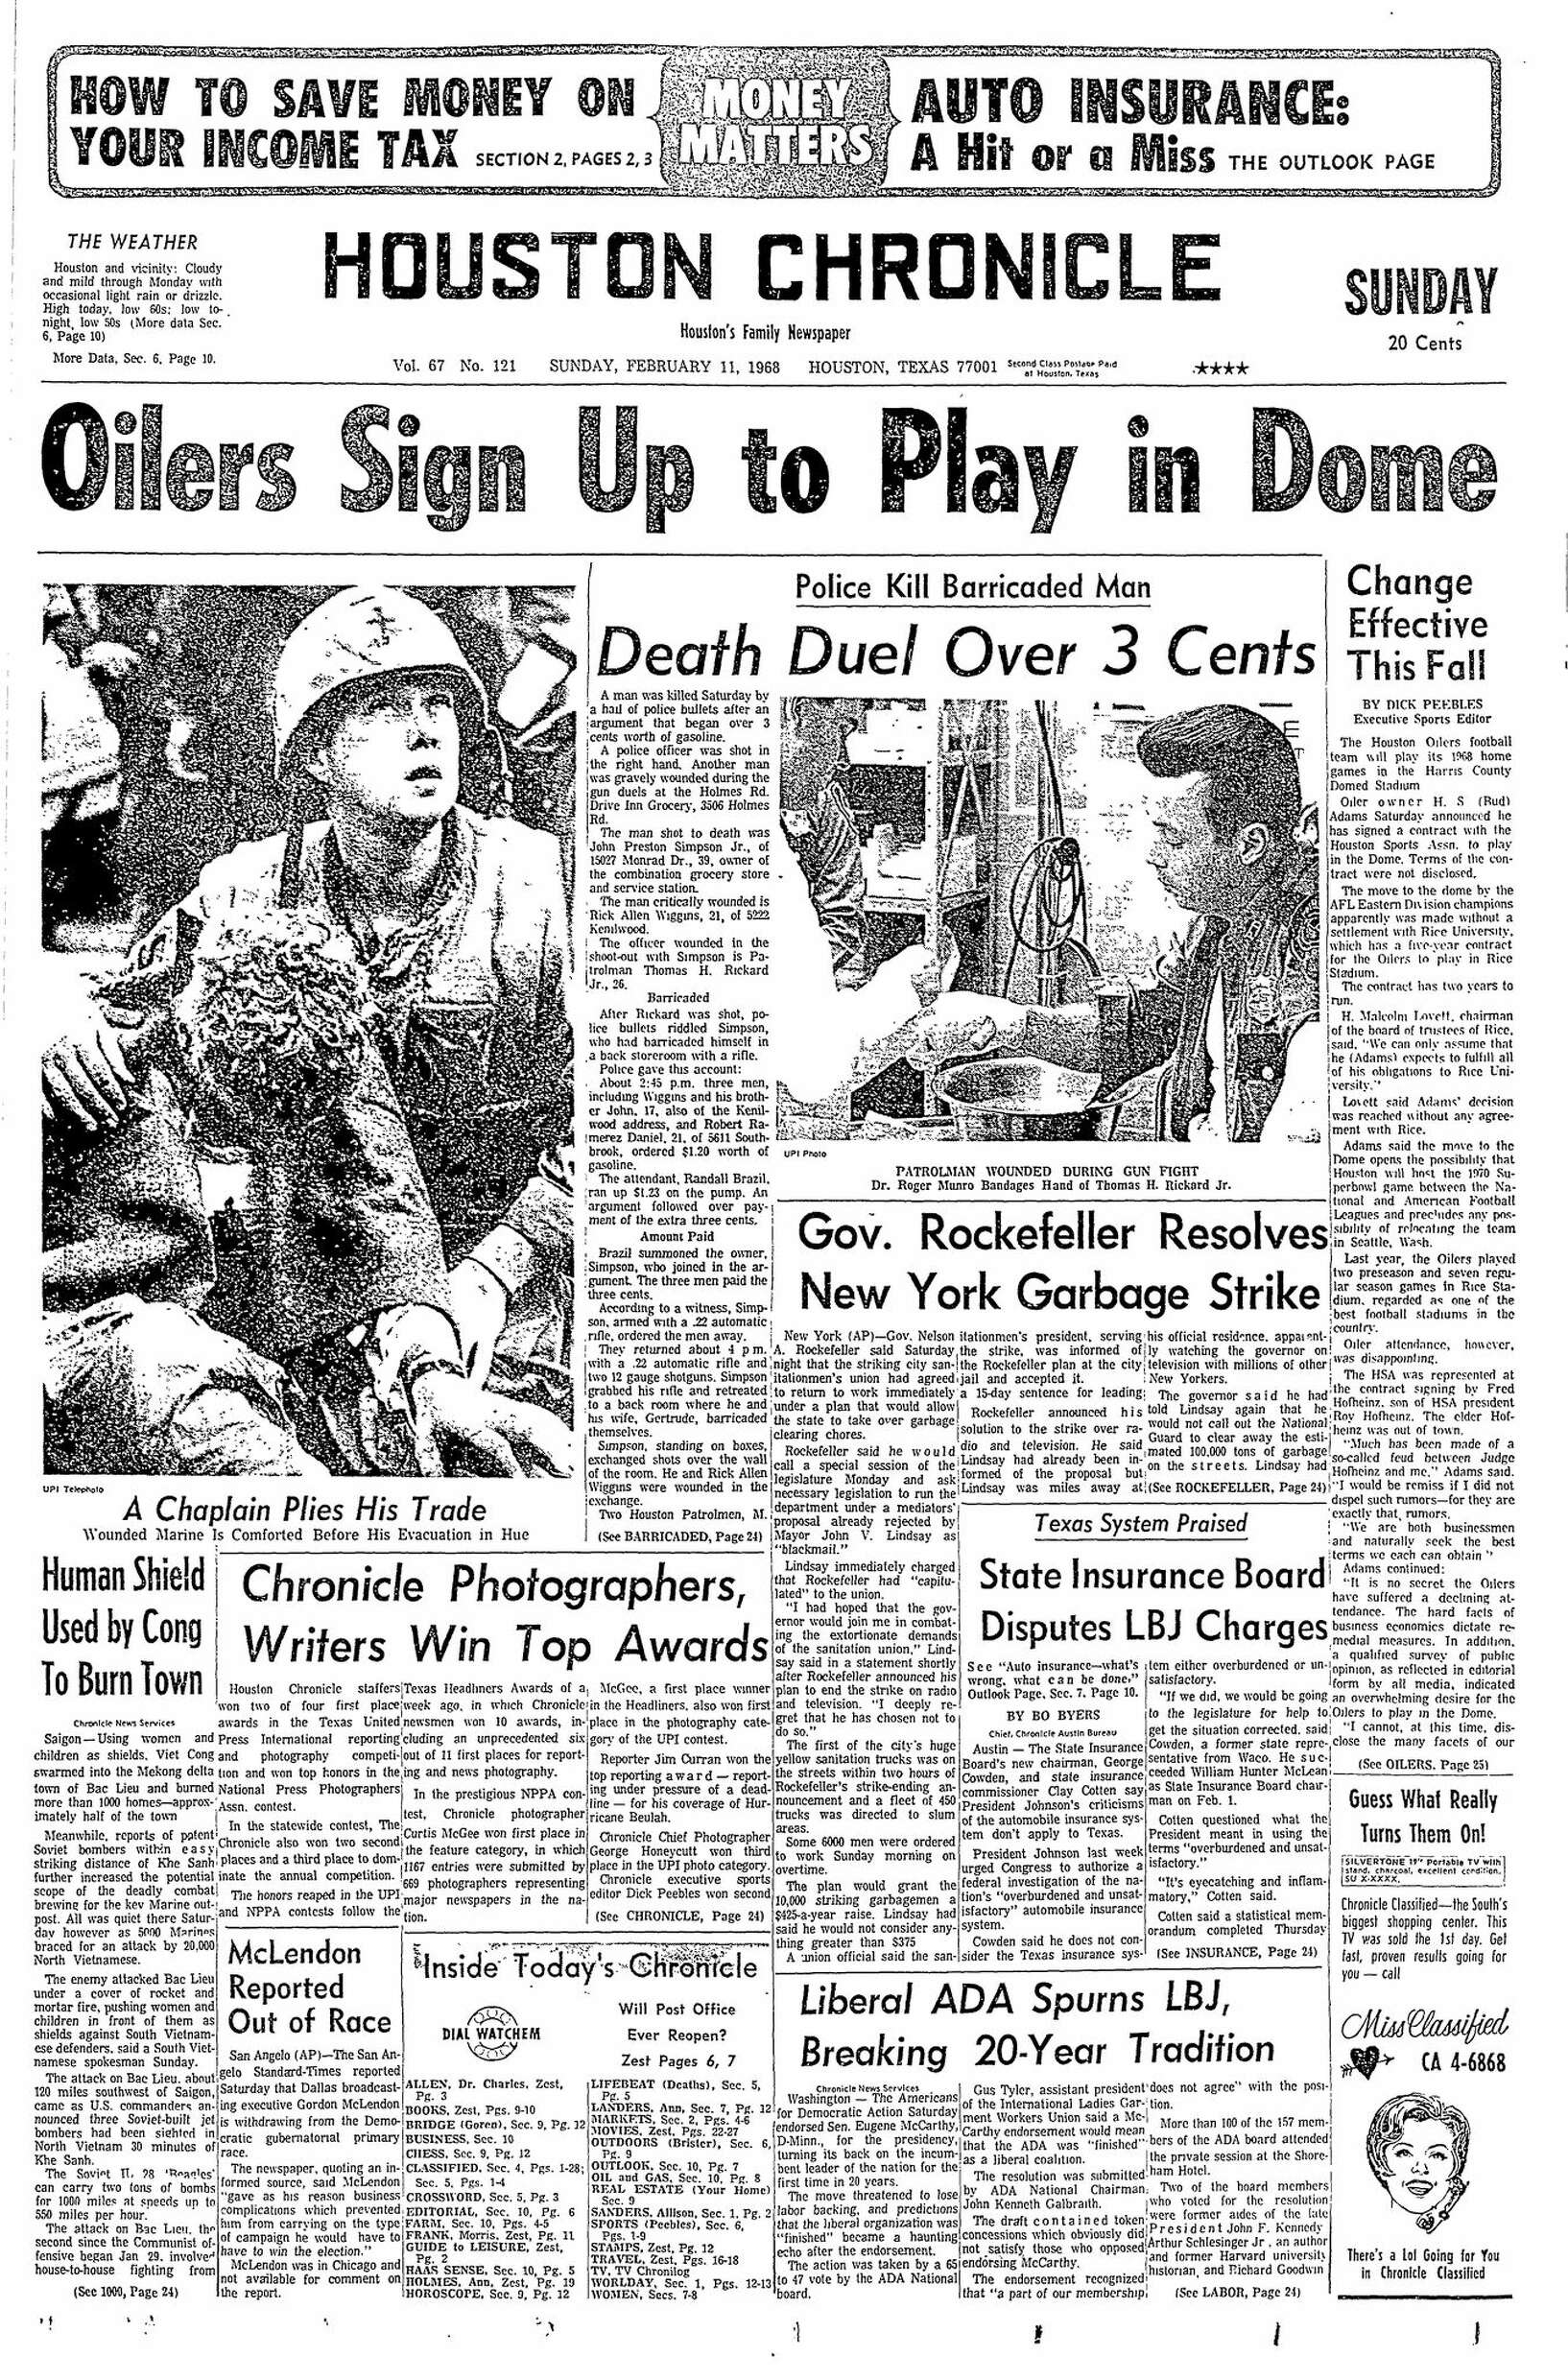 Today in Houston history, Feb. 11, 1968: Oilers announce plans to